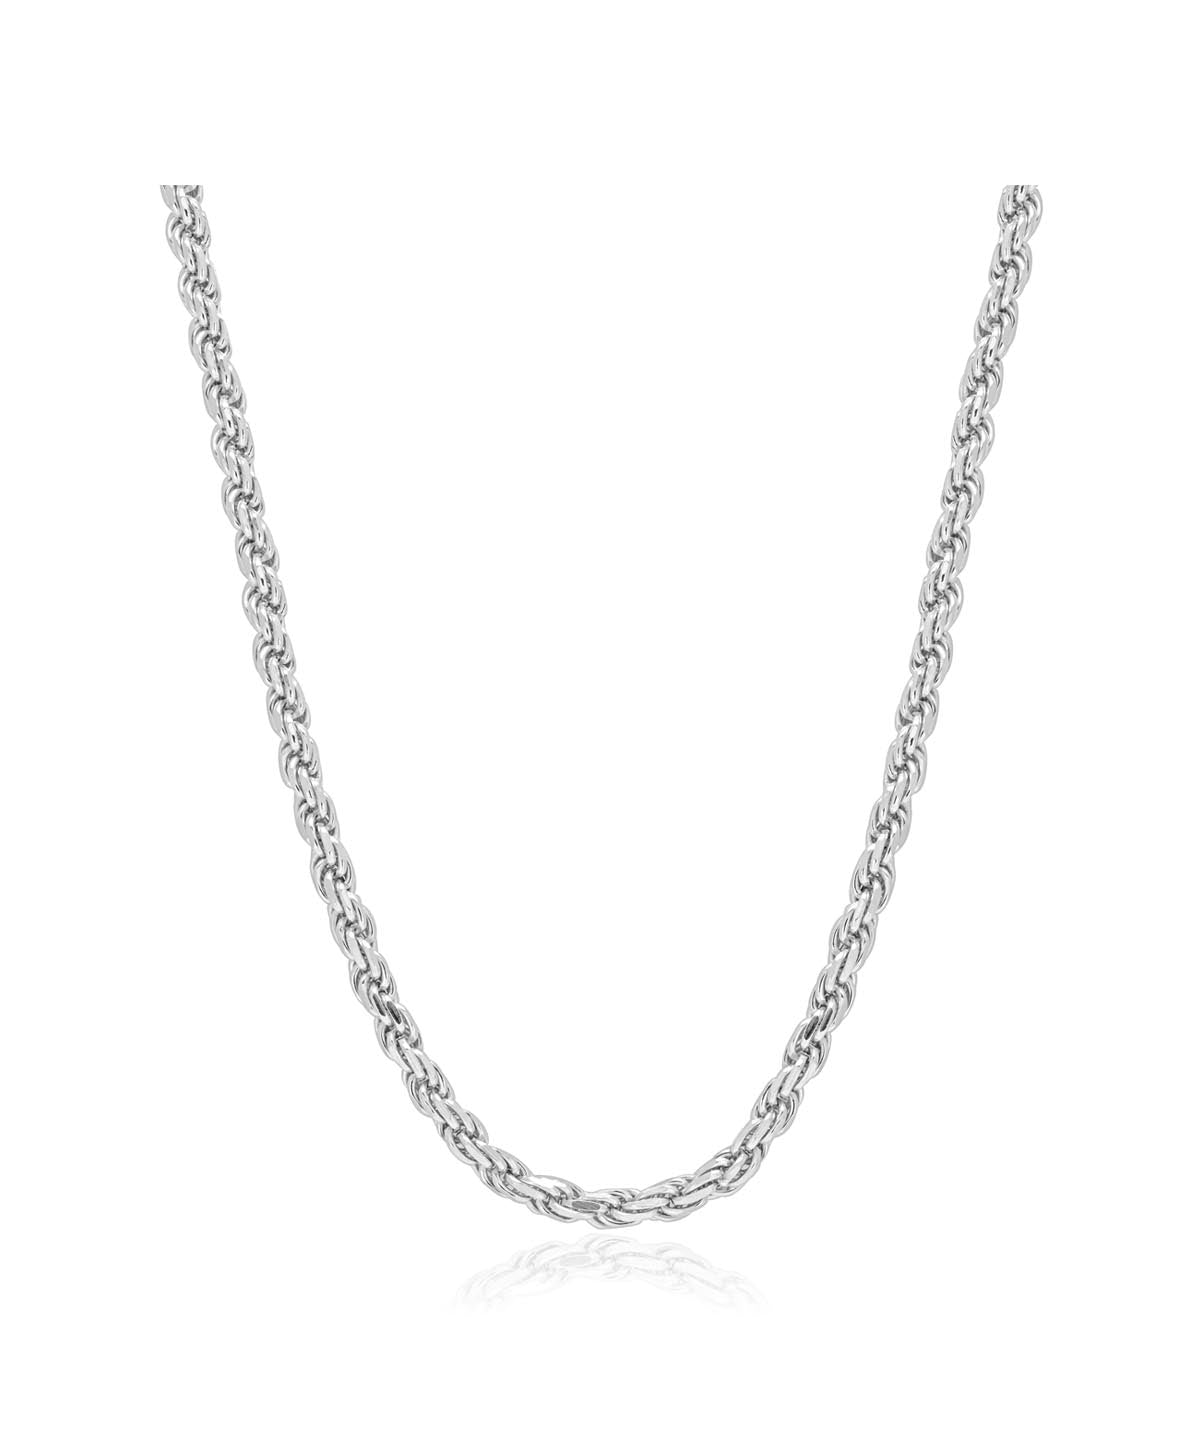 925 Sterling Silver Rhodium Plated 2.6mm Rope Chain 24"